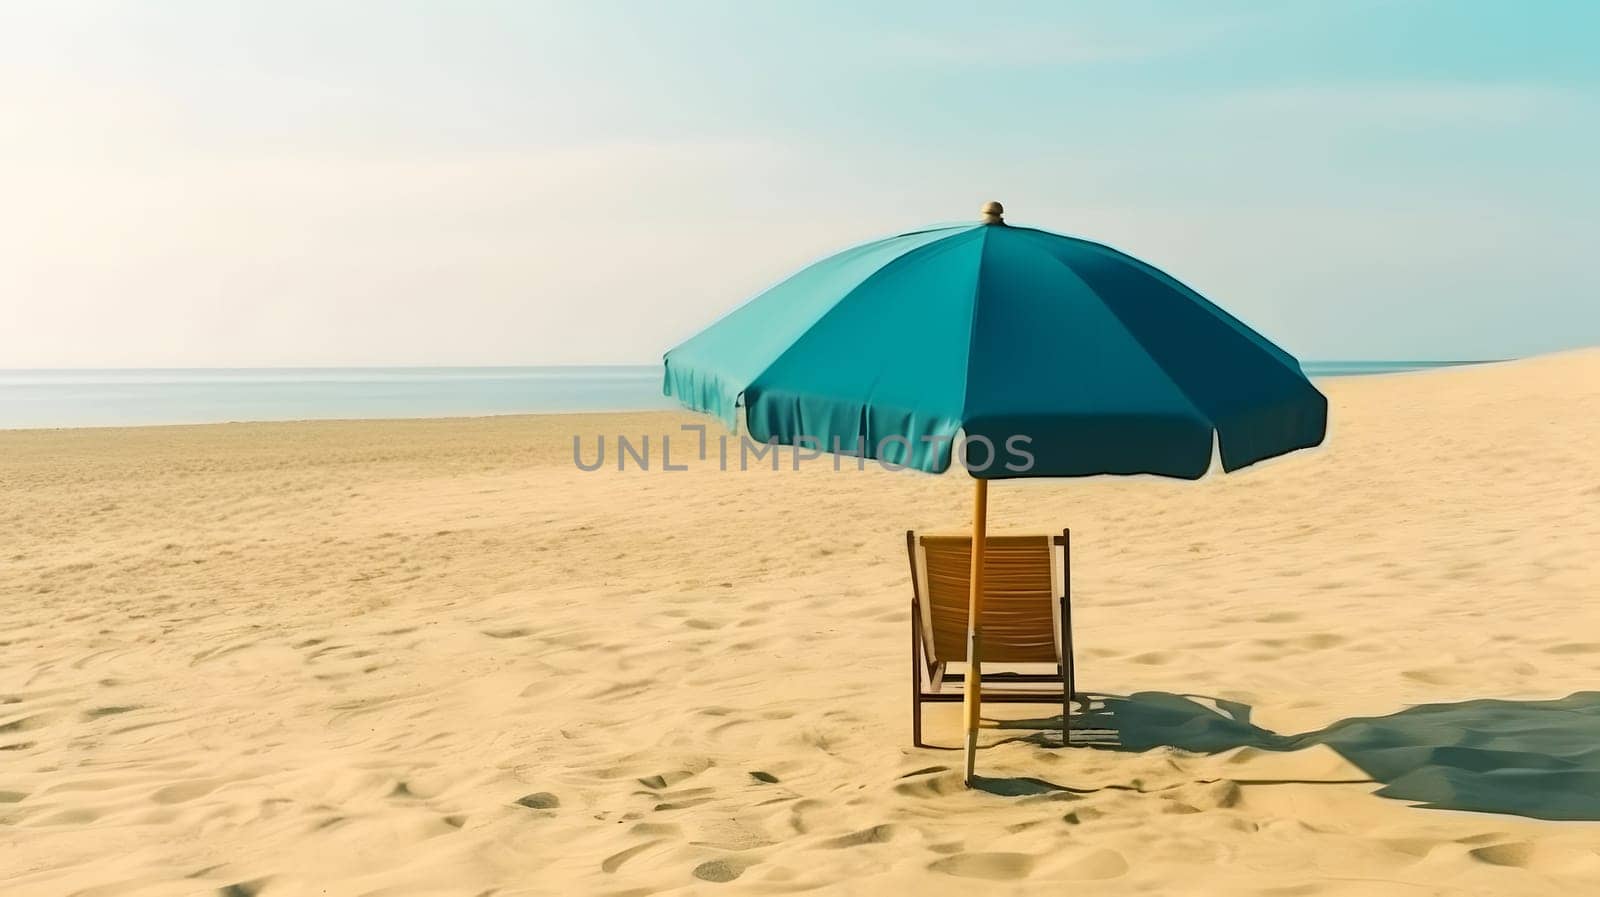 Blue beach umbrella with chair on the sand beach - summer vacation theme header, neural network generated art by z1b